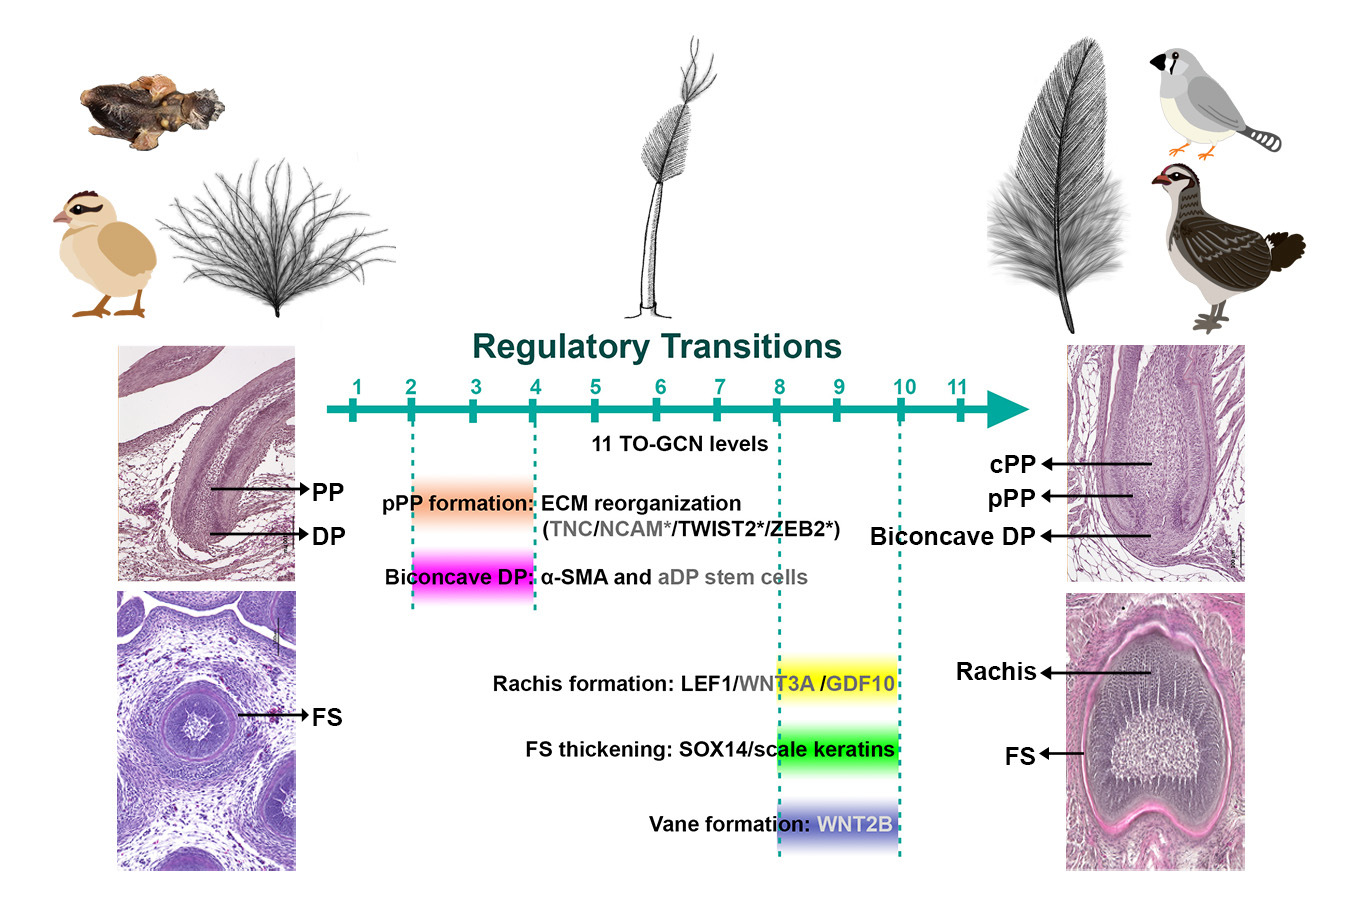 Regulatory switches for the downy-juvenile feather transition in birds